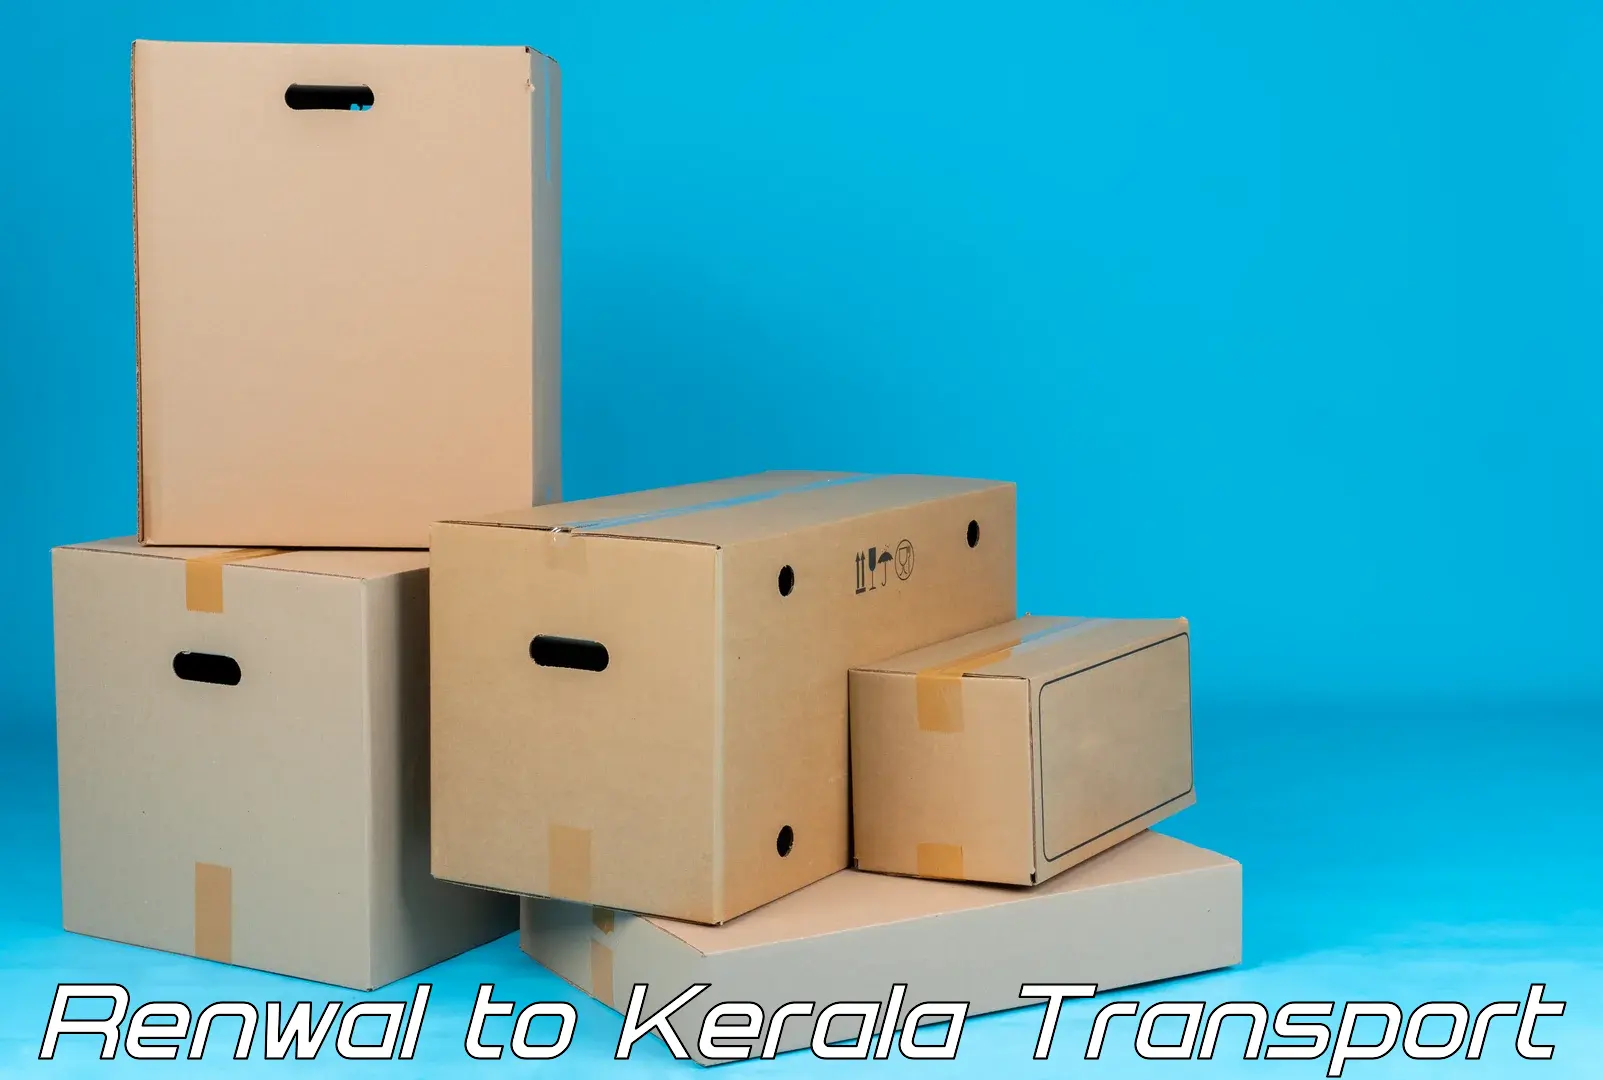 Nearby transport service Renwal to Kerala